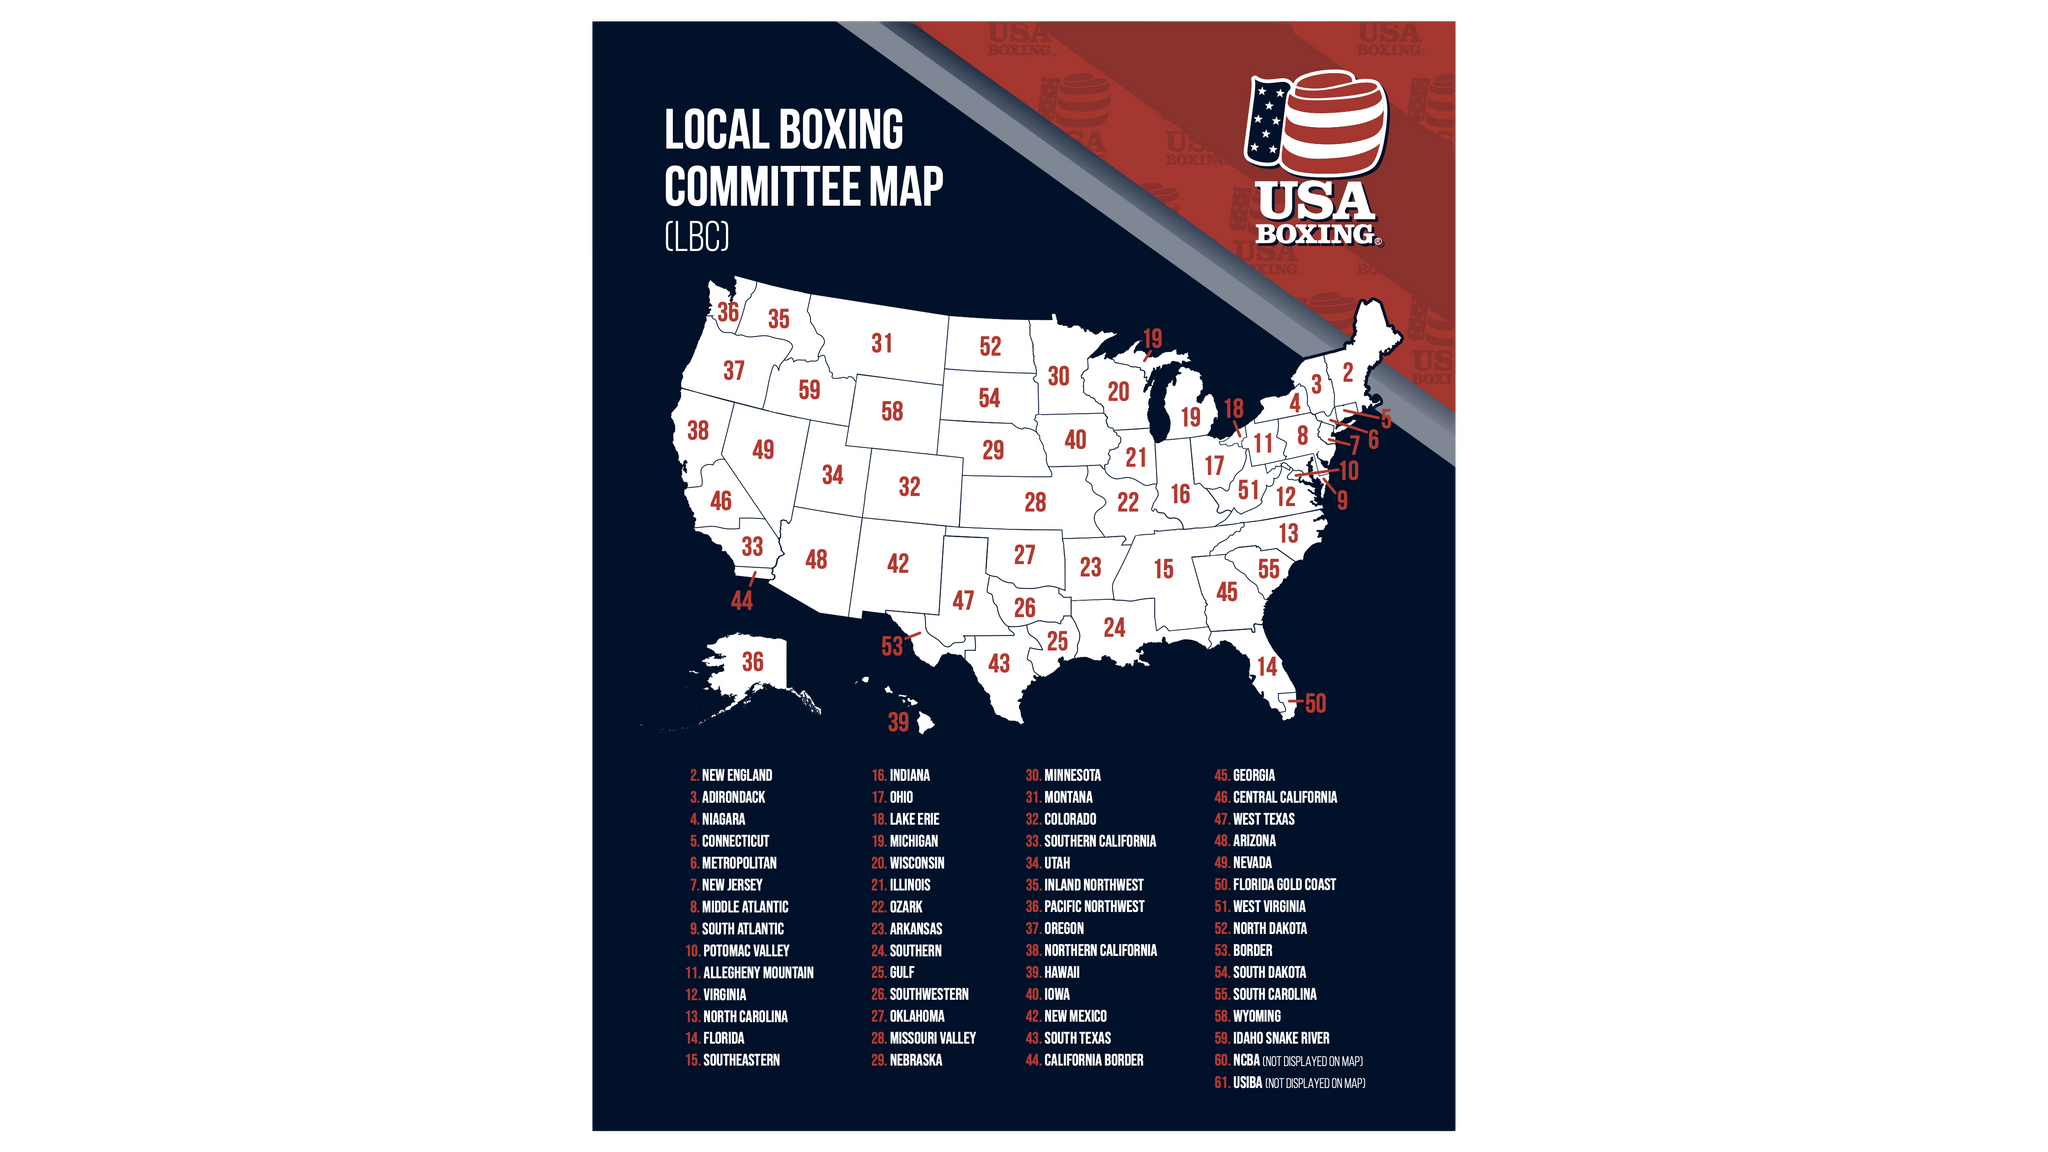 USA Boxing Local Boxing Committee Map